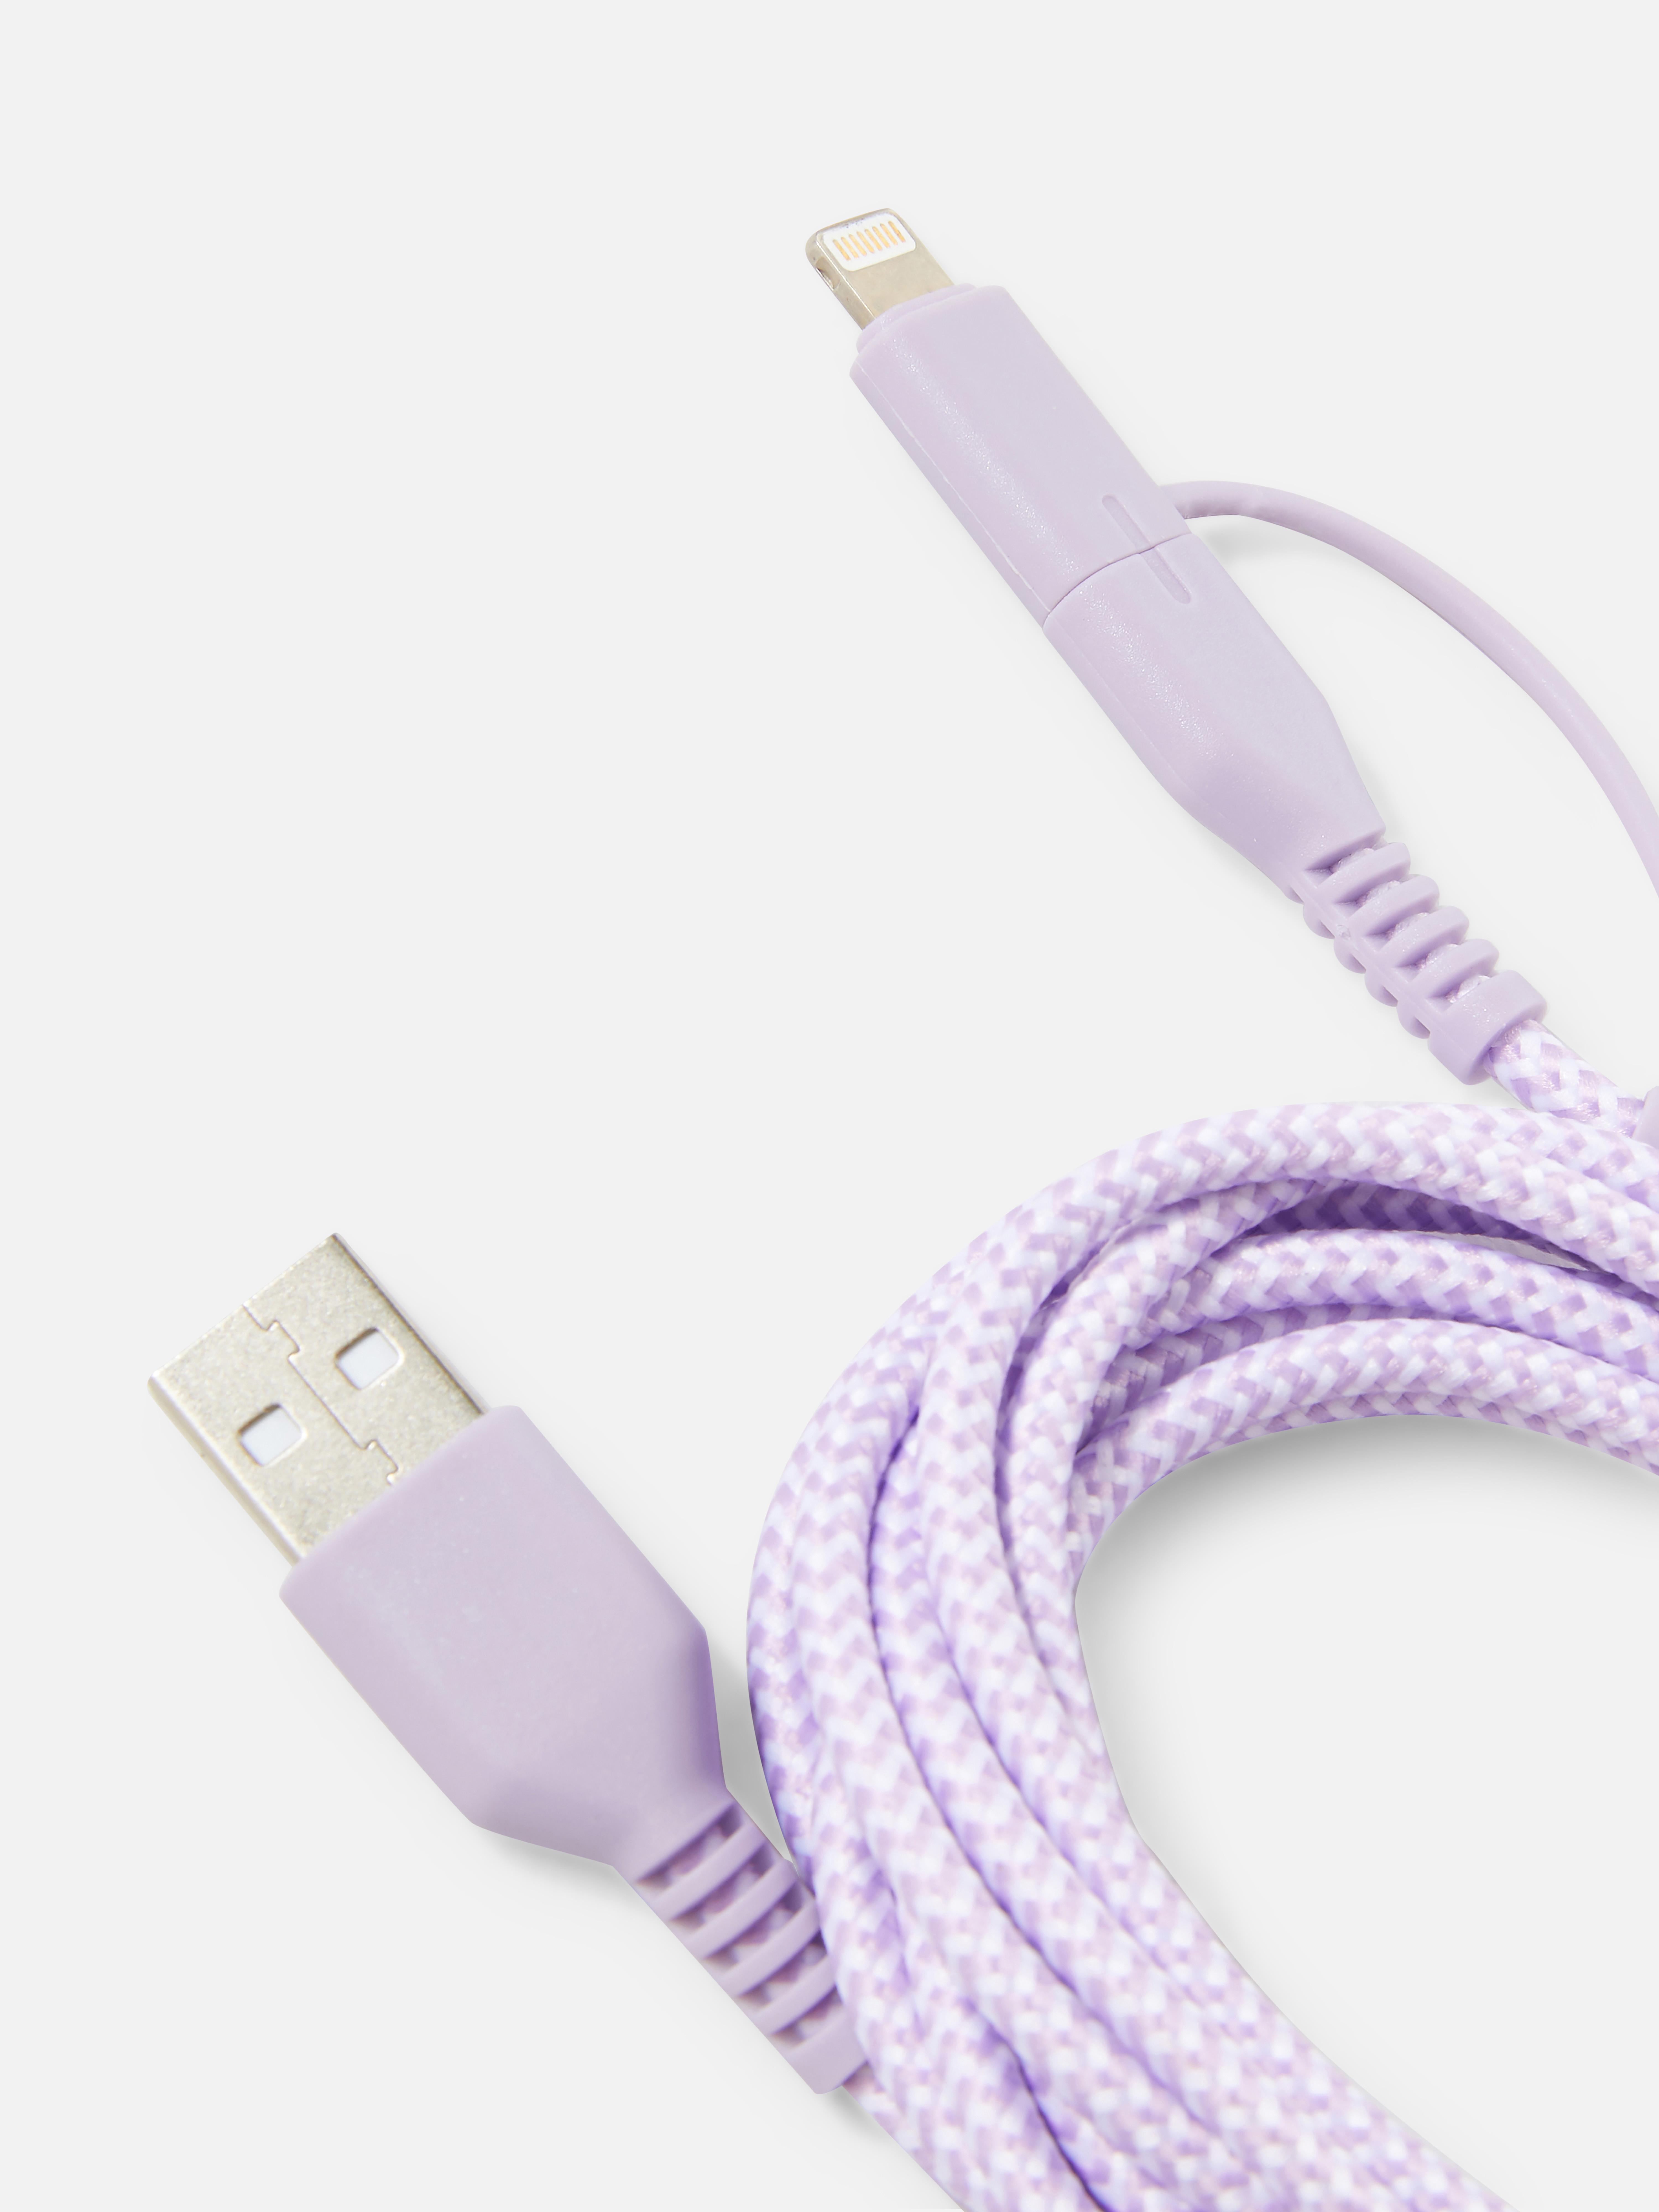 2m Lightning to USB Charging Cable